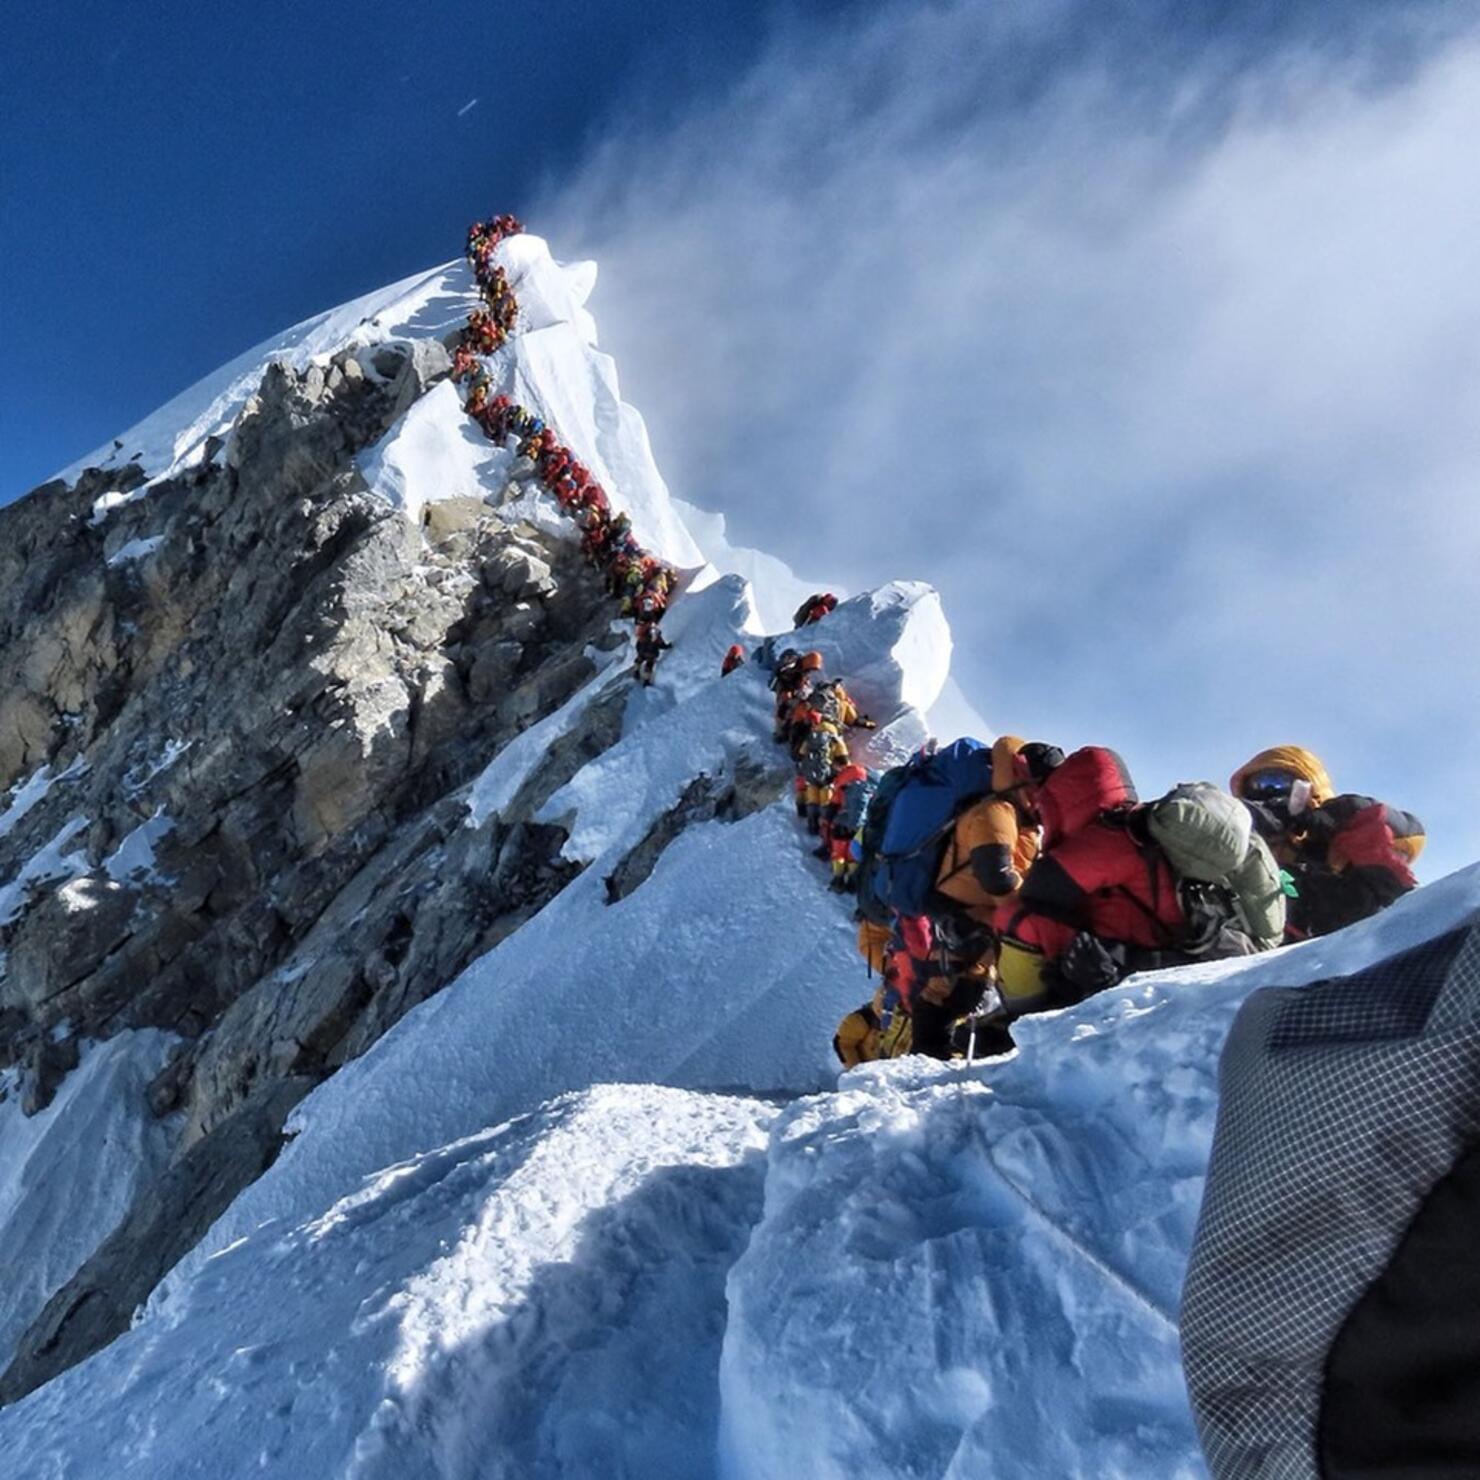 Mount everest climbers stuck in traffic jam as three people died